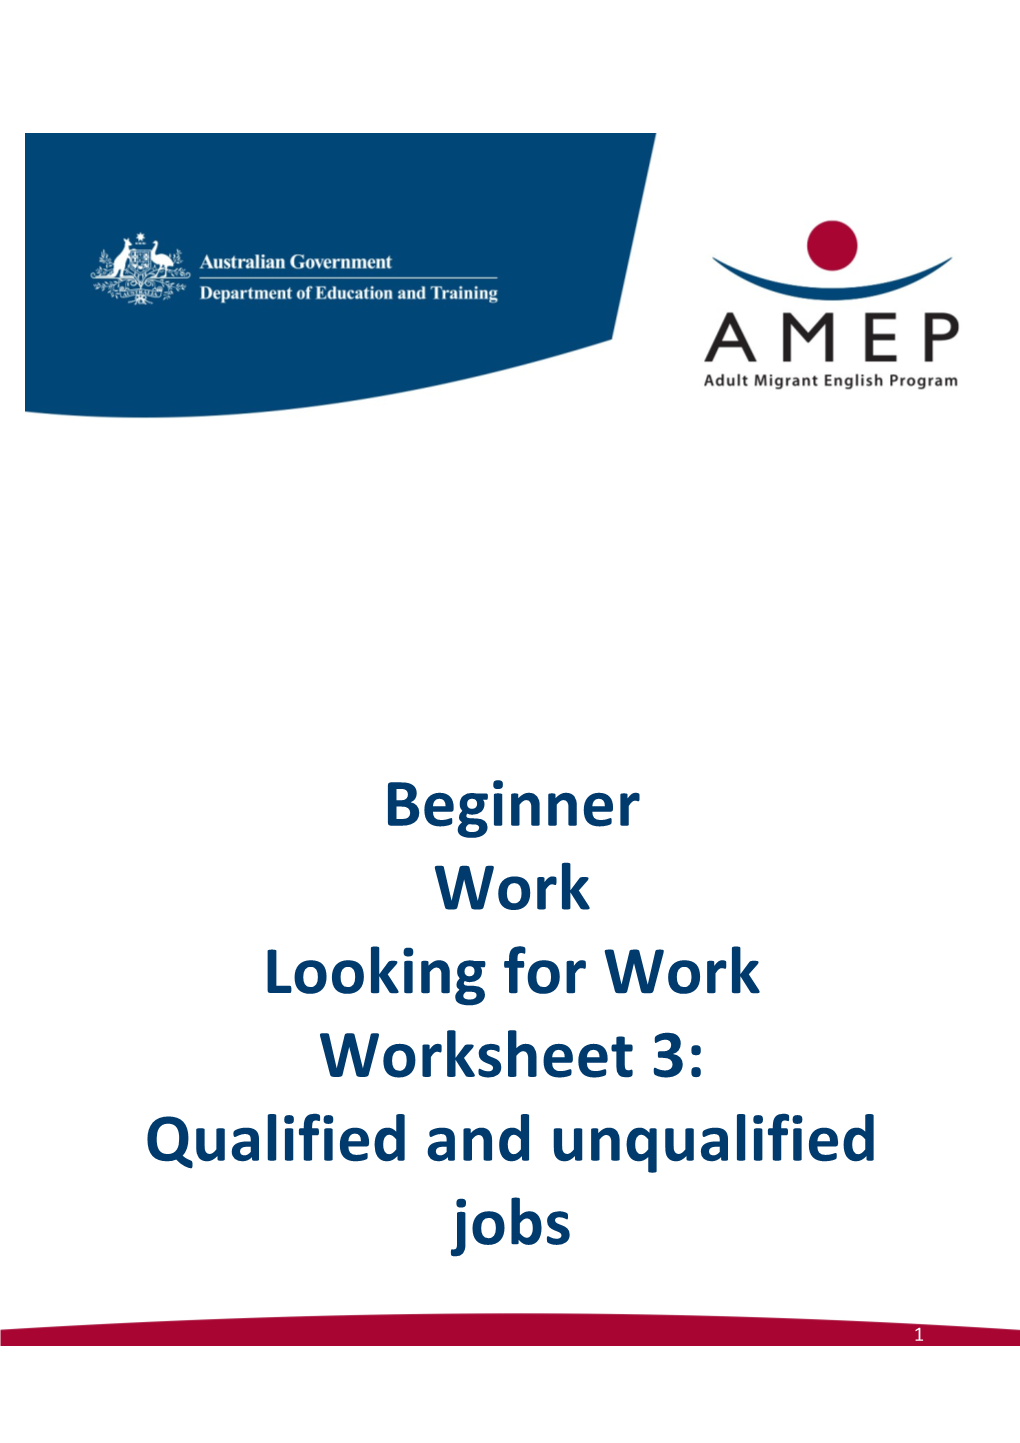 Beginner Work Looking for Work Worksheet 3: Qualified and Unqualified Jobs